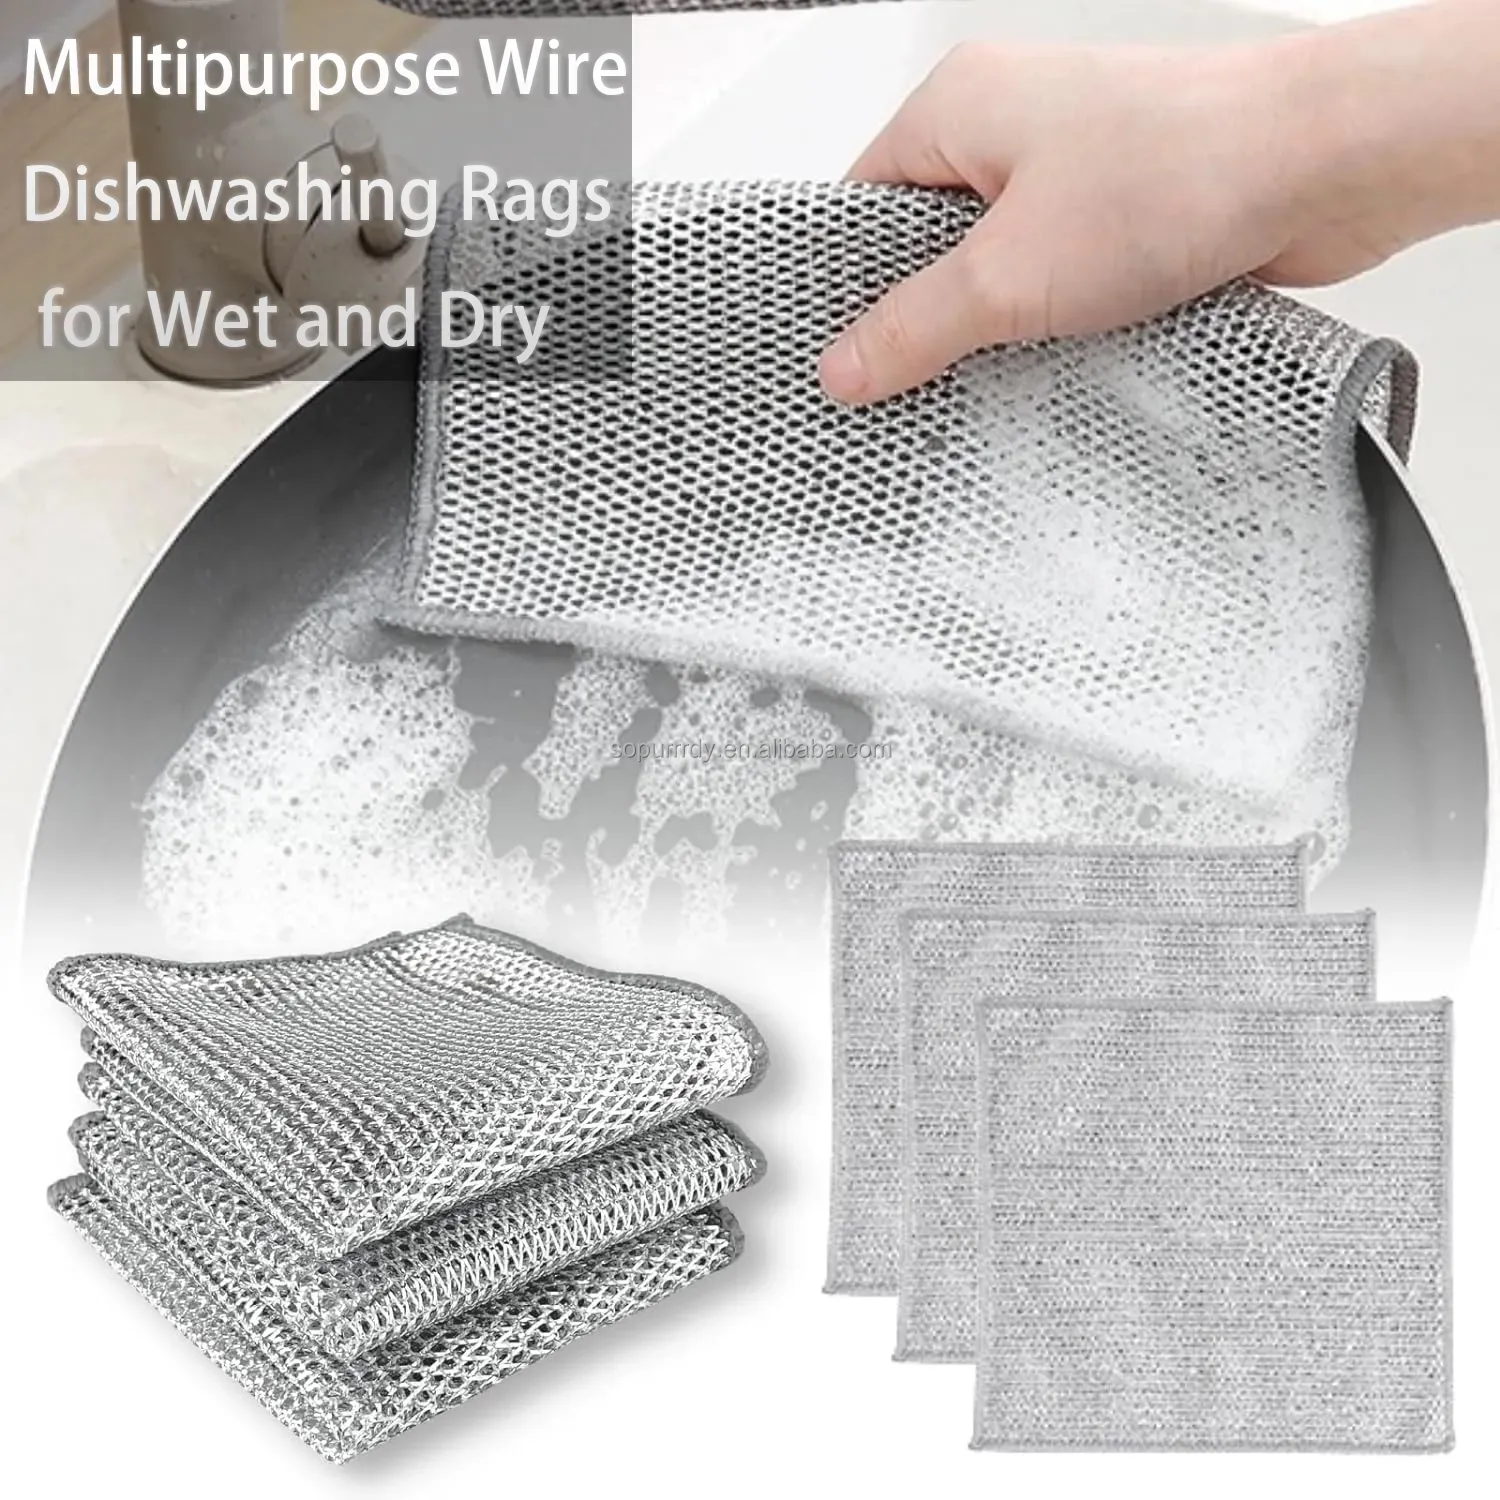 Kitchen Wire Dishcloth Steel Wire Scrubbers Multifunctional Non Scratch Layer Double Sided Silver Wire Cleaning Cloths